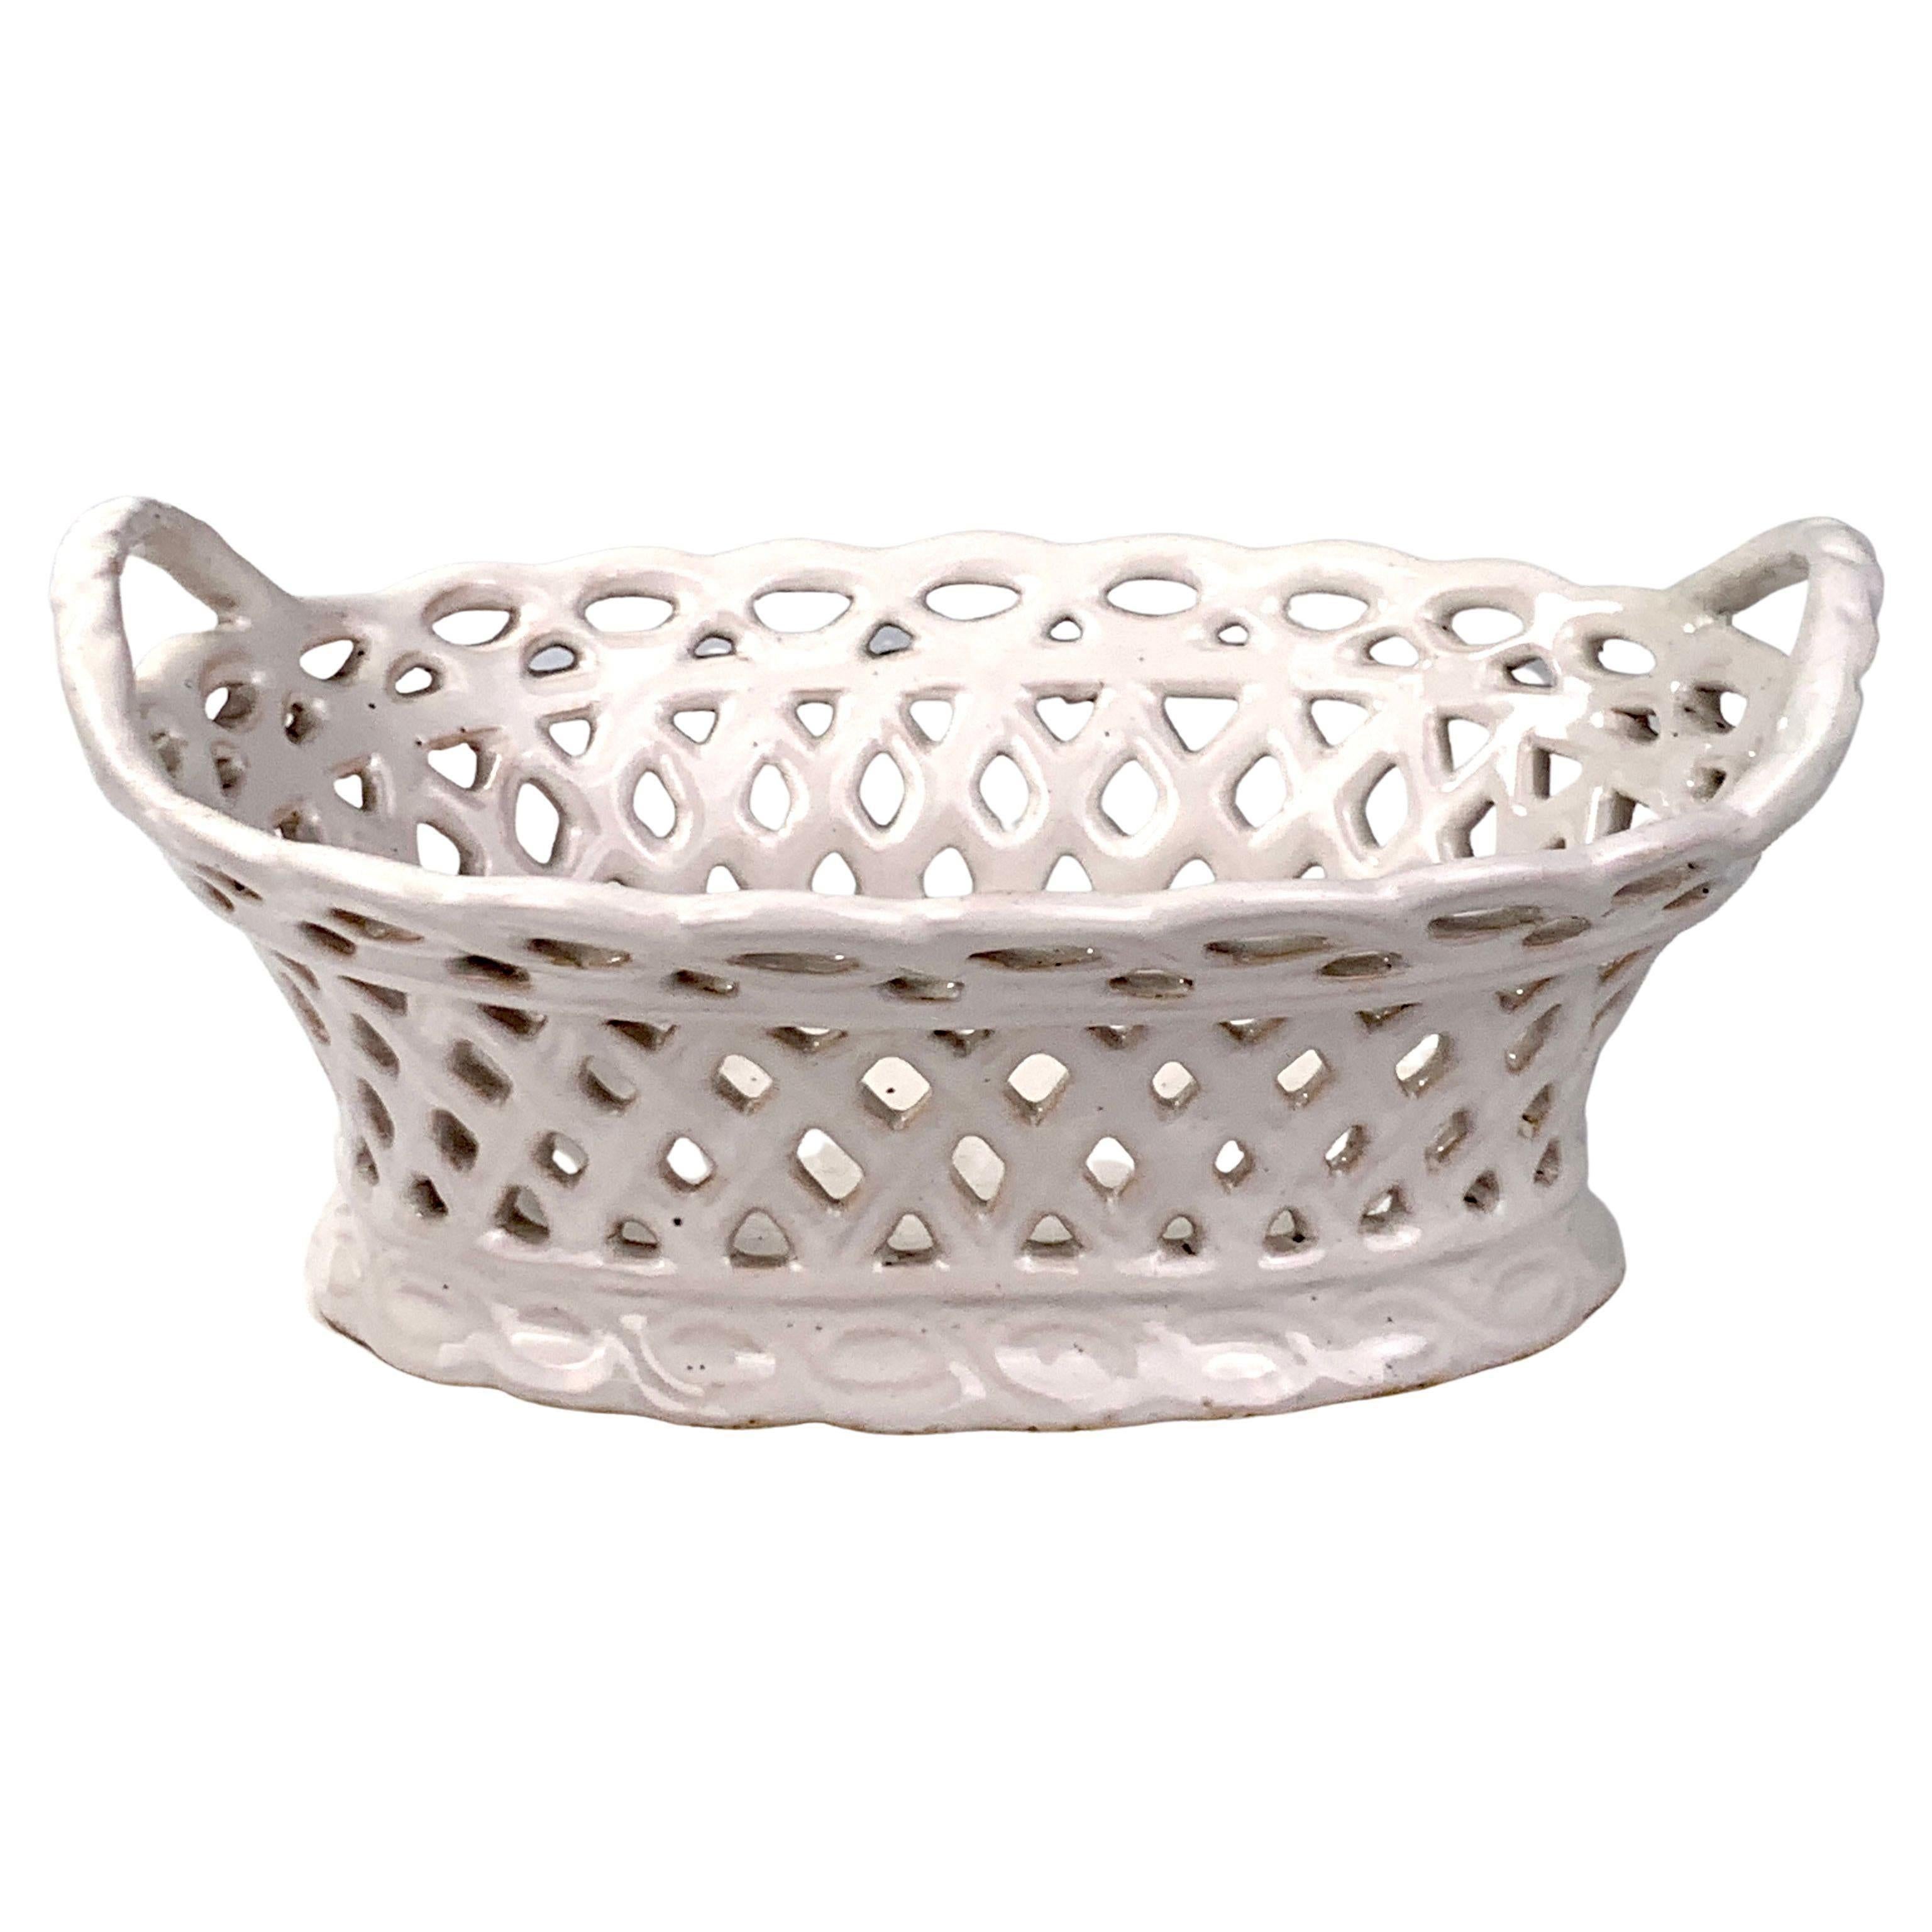 This attractive white faience basket has an oval pierced body around a solid bottom. It was manufactured at the Durlach factory in Germany.
The basket is modeled in a wicker basket style, a popular motif for late 18th and early 19th-century